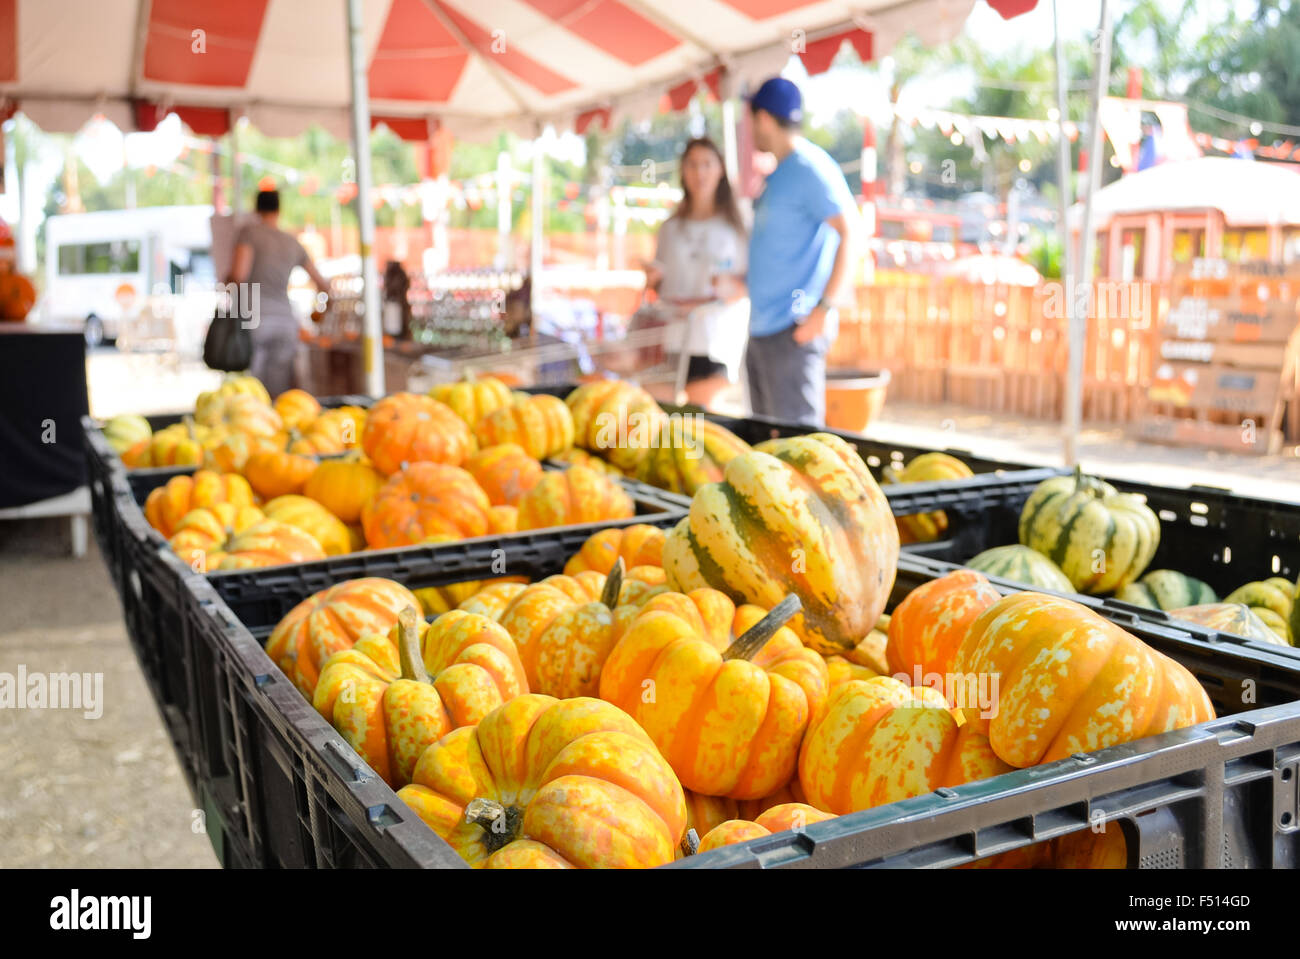 Couple shopping for bright yellow-orange pumpkins in market stalls. Stock Photo